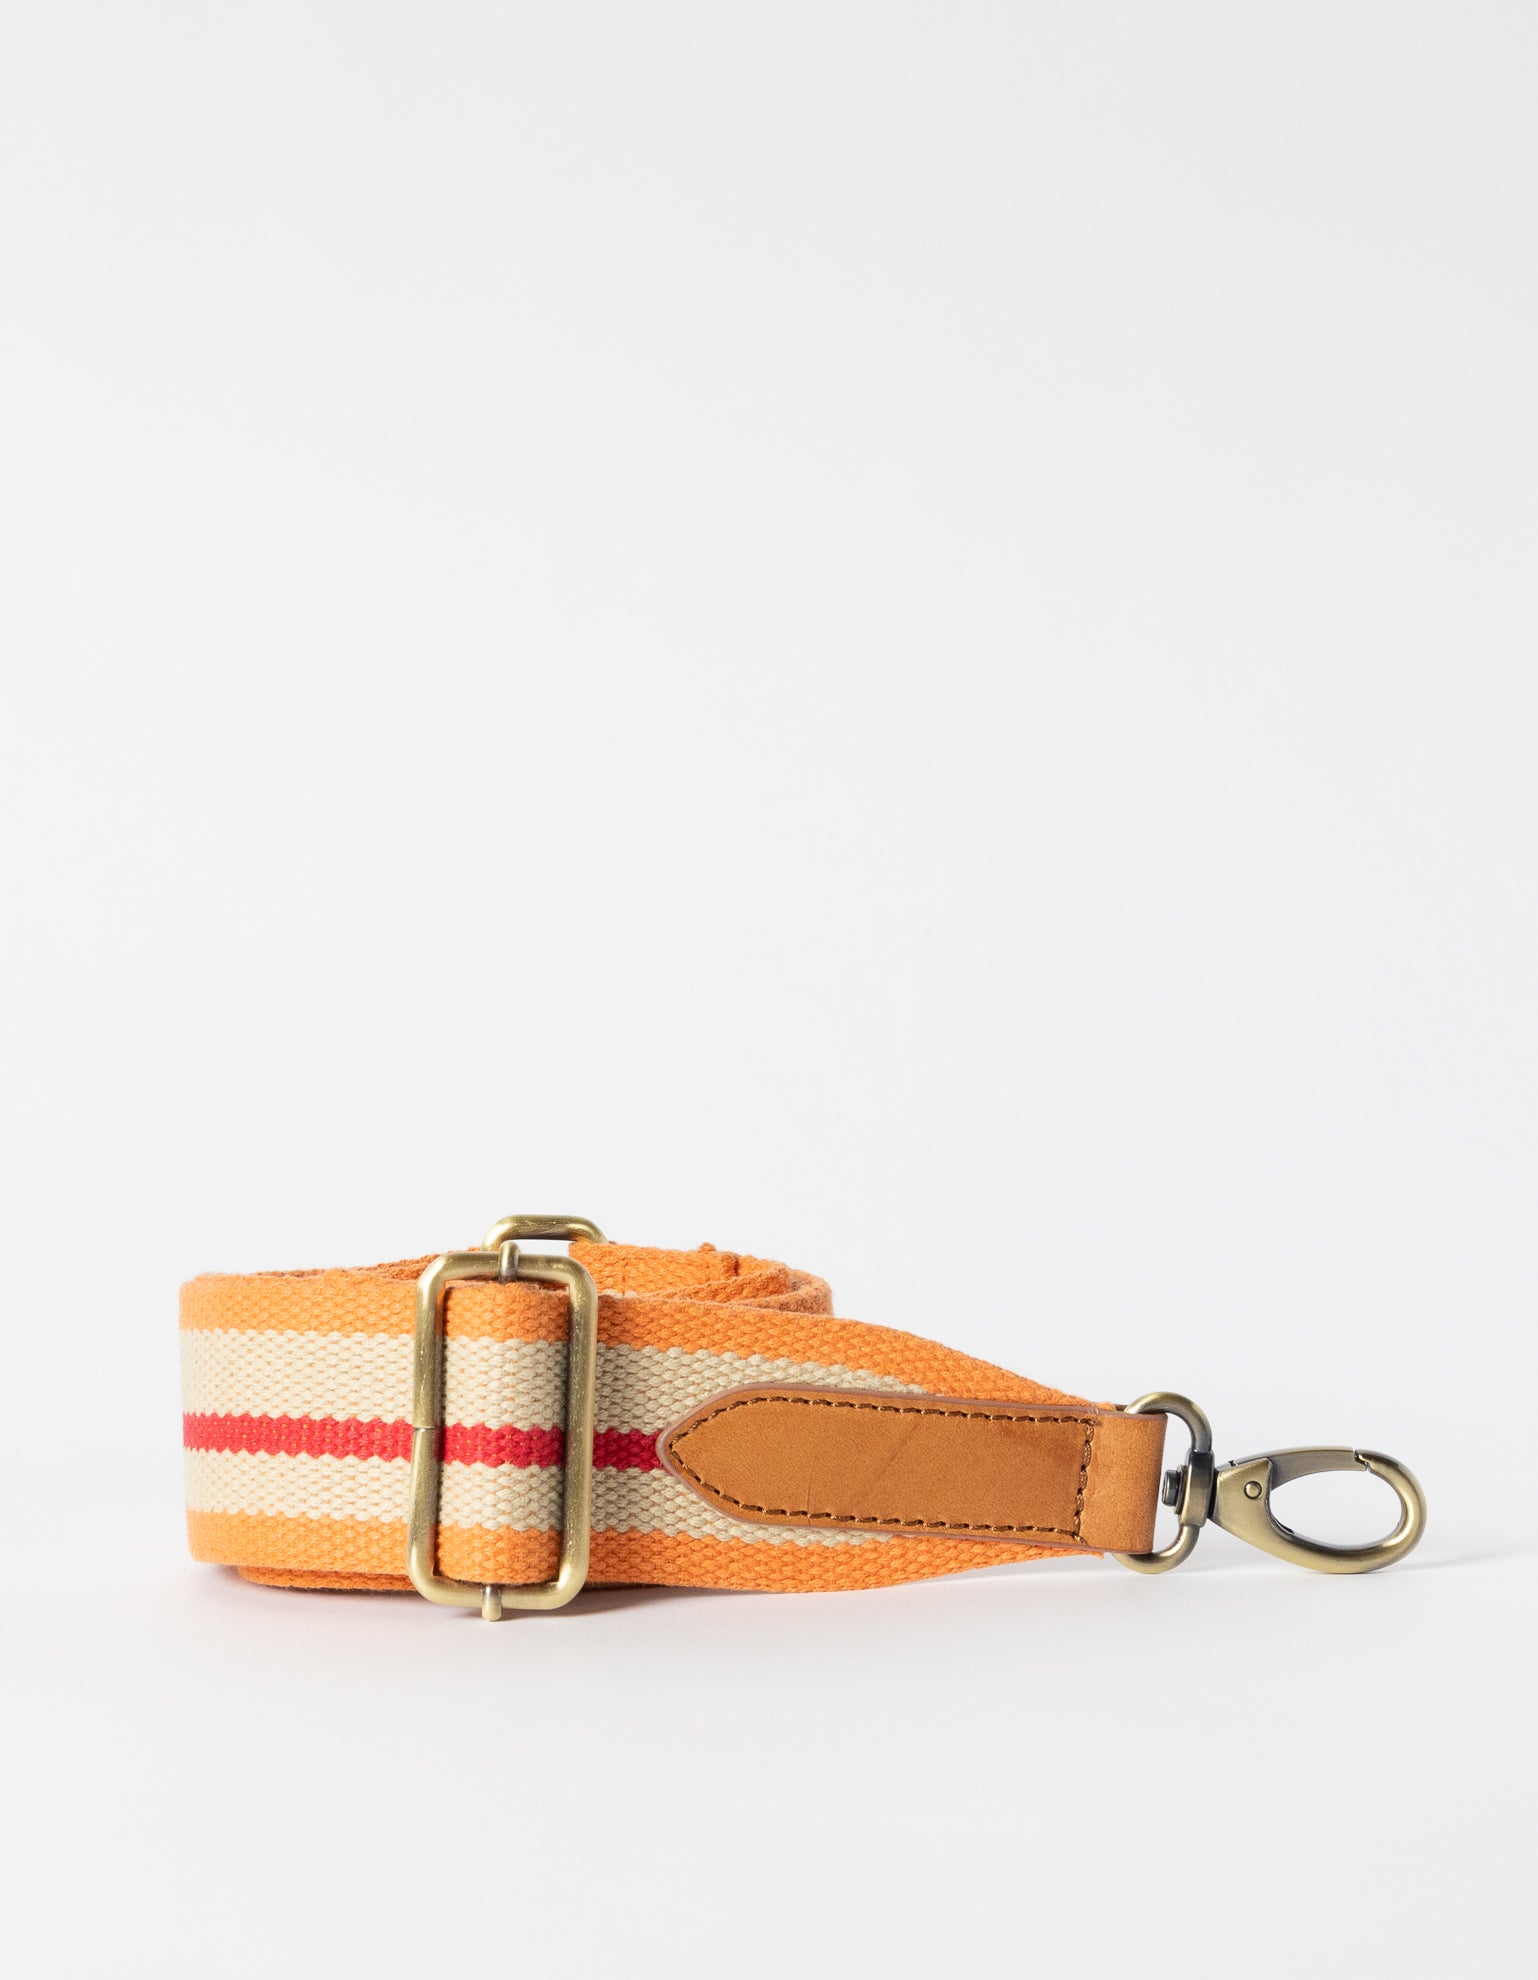 Webbing strap in orange & red with cognac leather details - product image